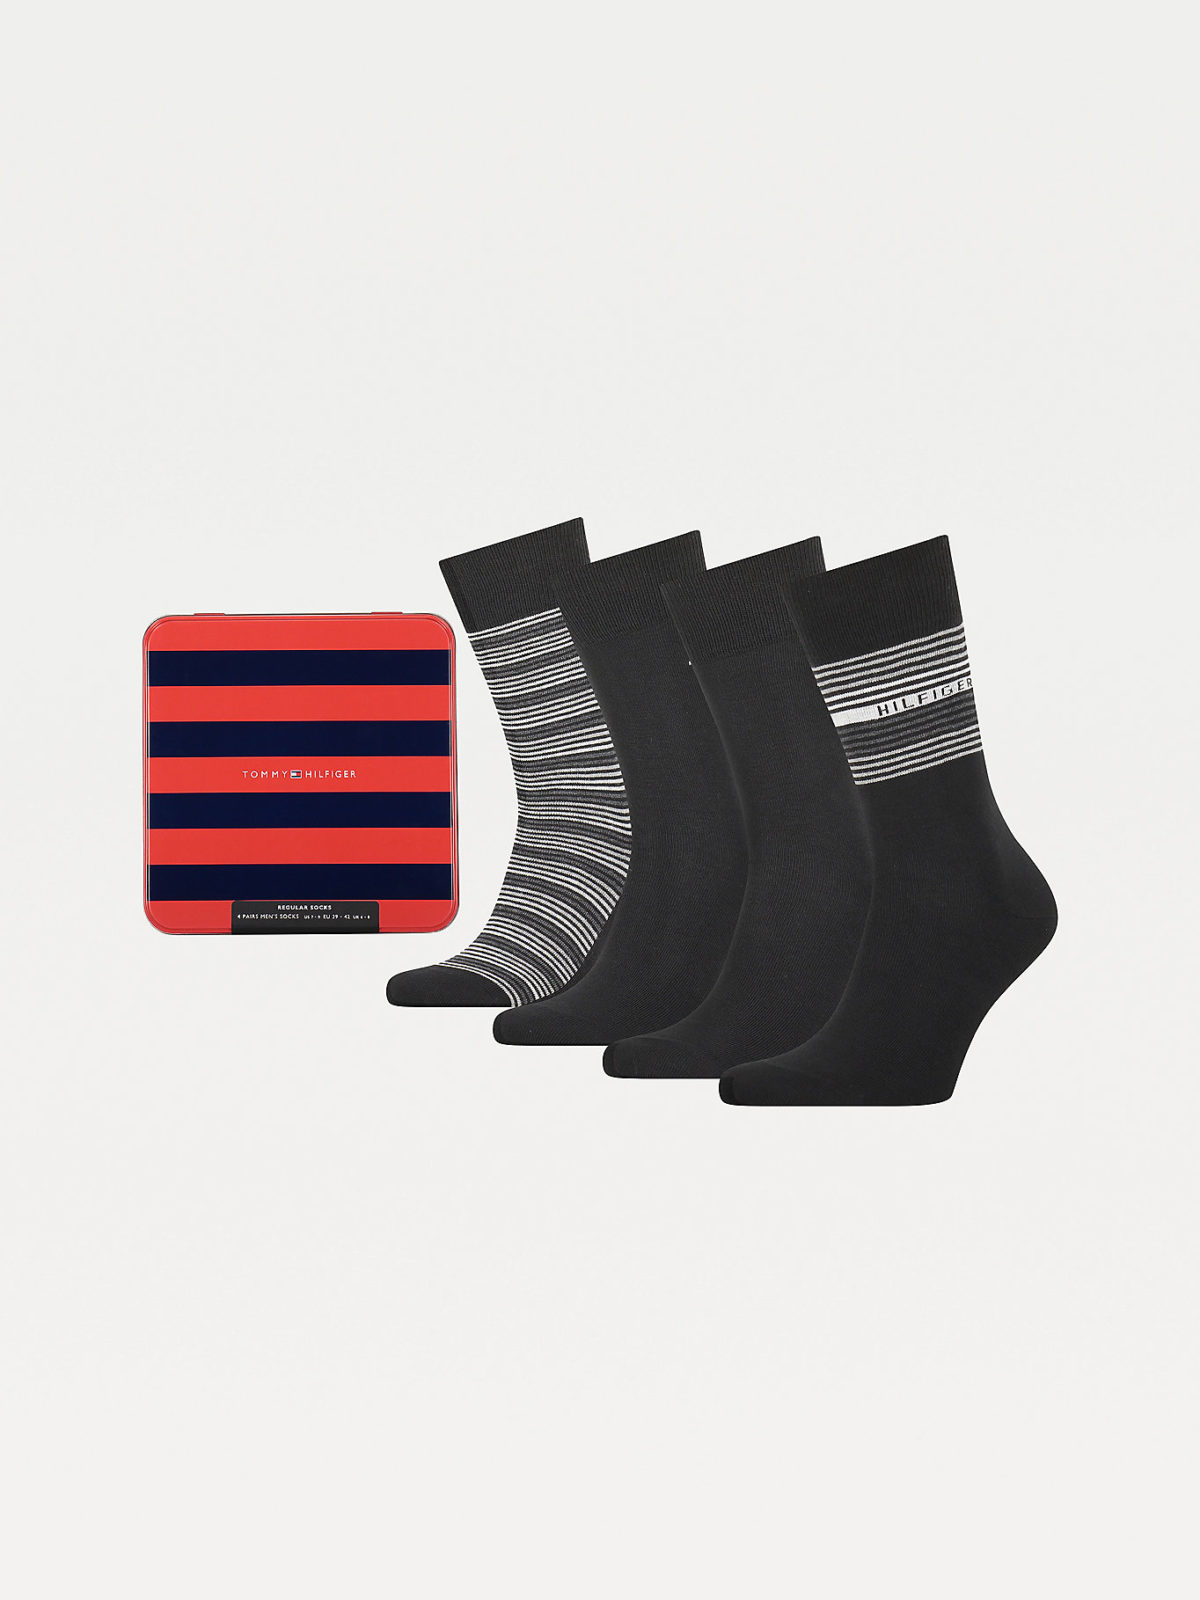 Tommy Hilfiger four pairs socks in gift box. Black with tommy hilfiger branding